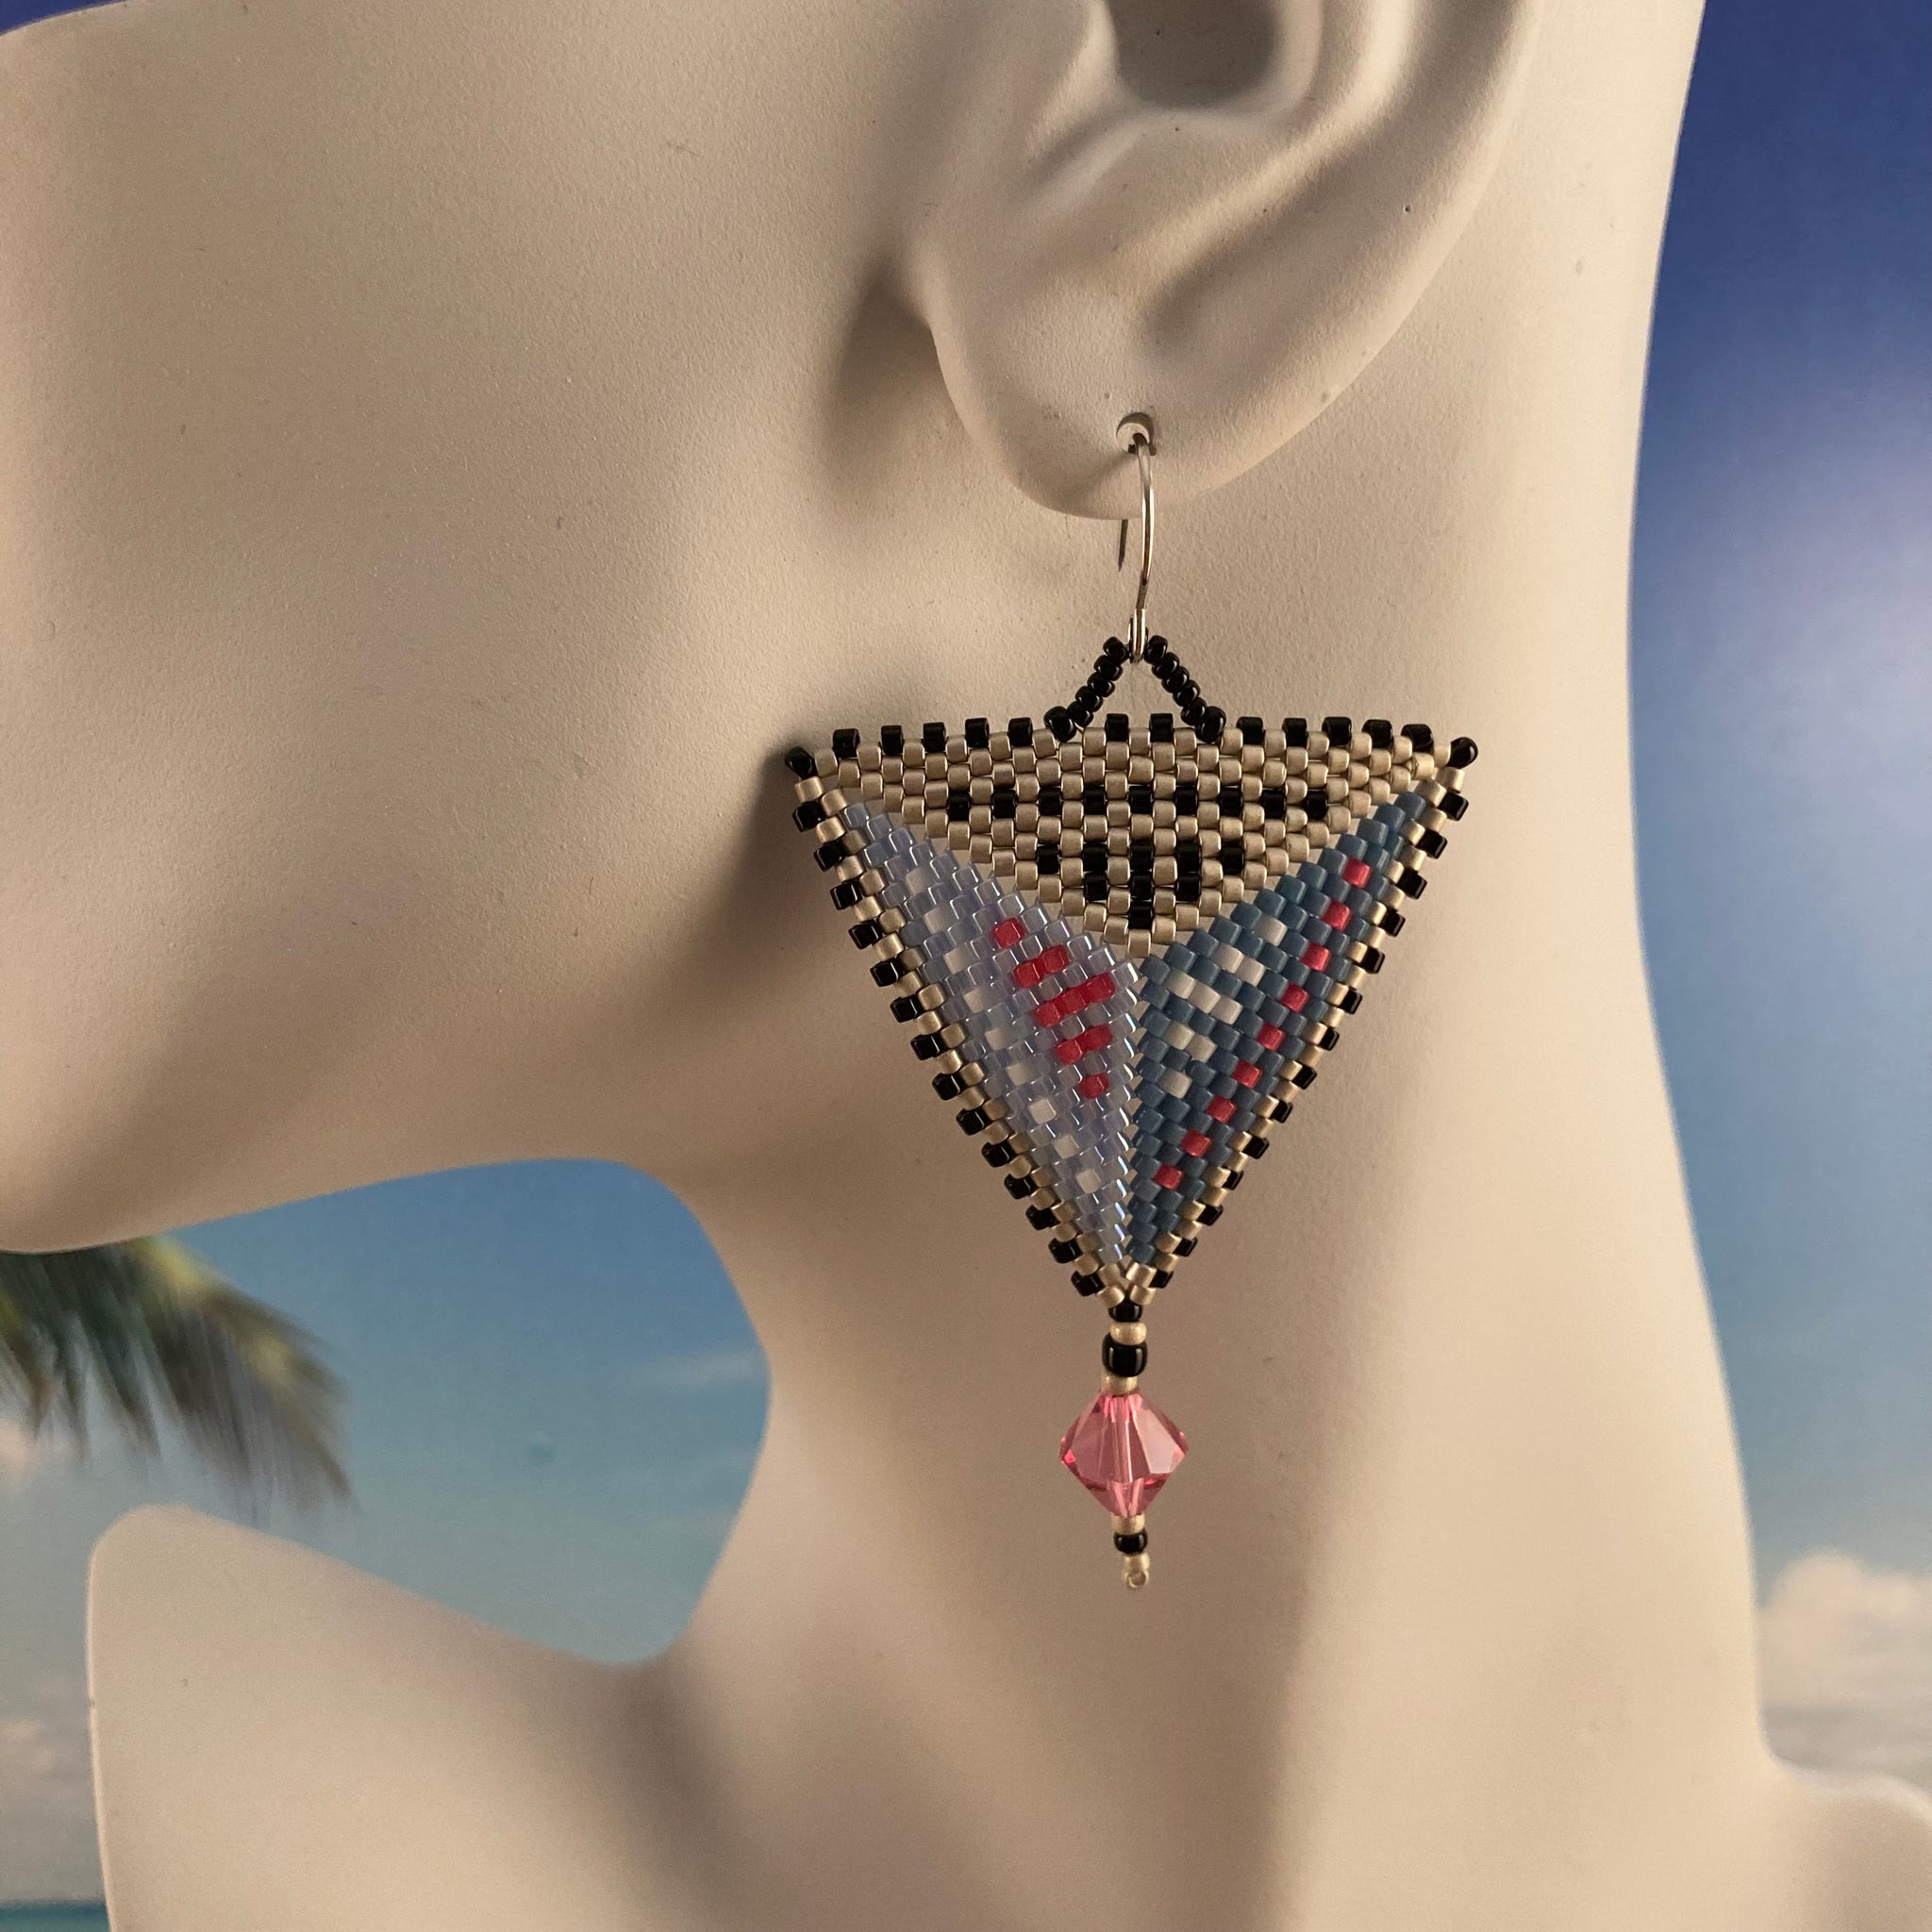 Beaded Geometric Triangle Earrings Artisan Handmade Beaded by The Beach Light Blue Denim Blue with Matching Large Genuine Swarovski Crystals Stunning Couture party